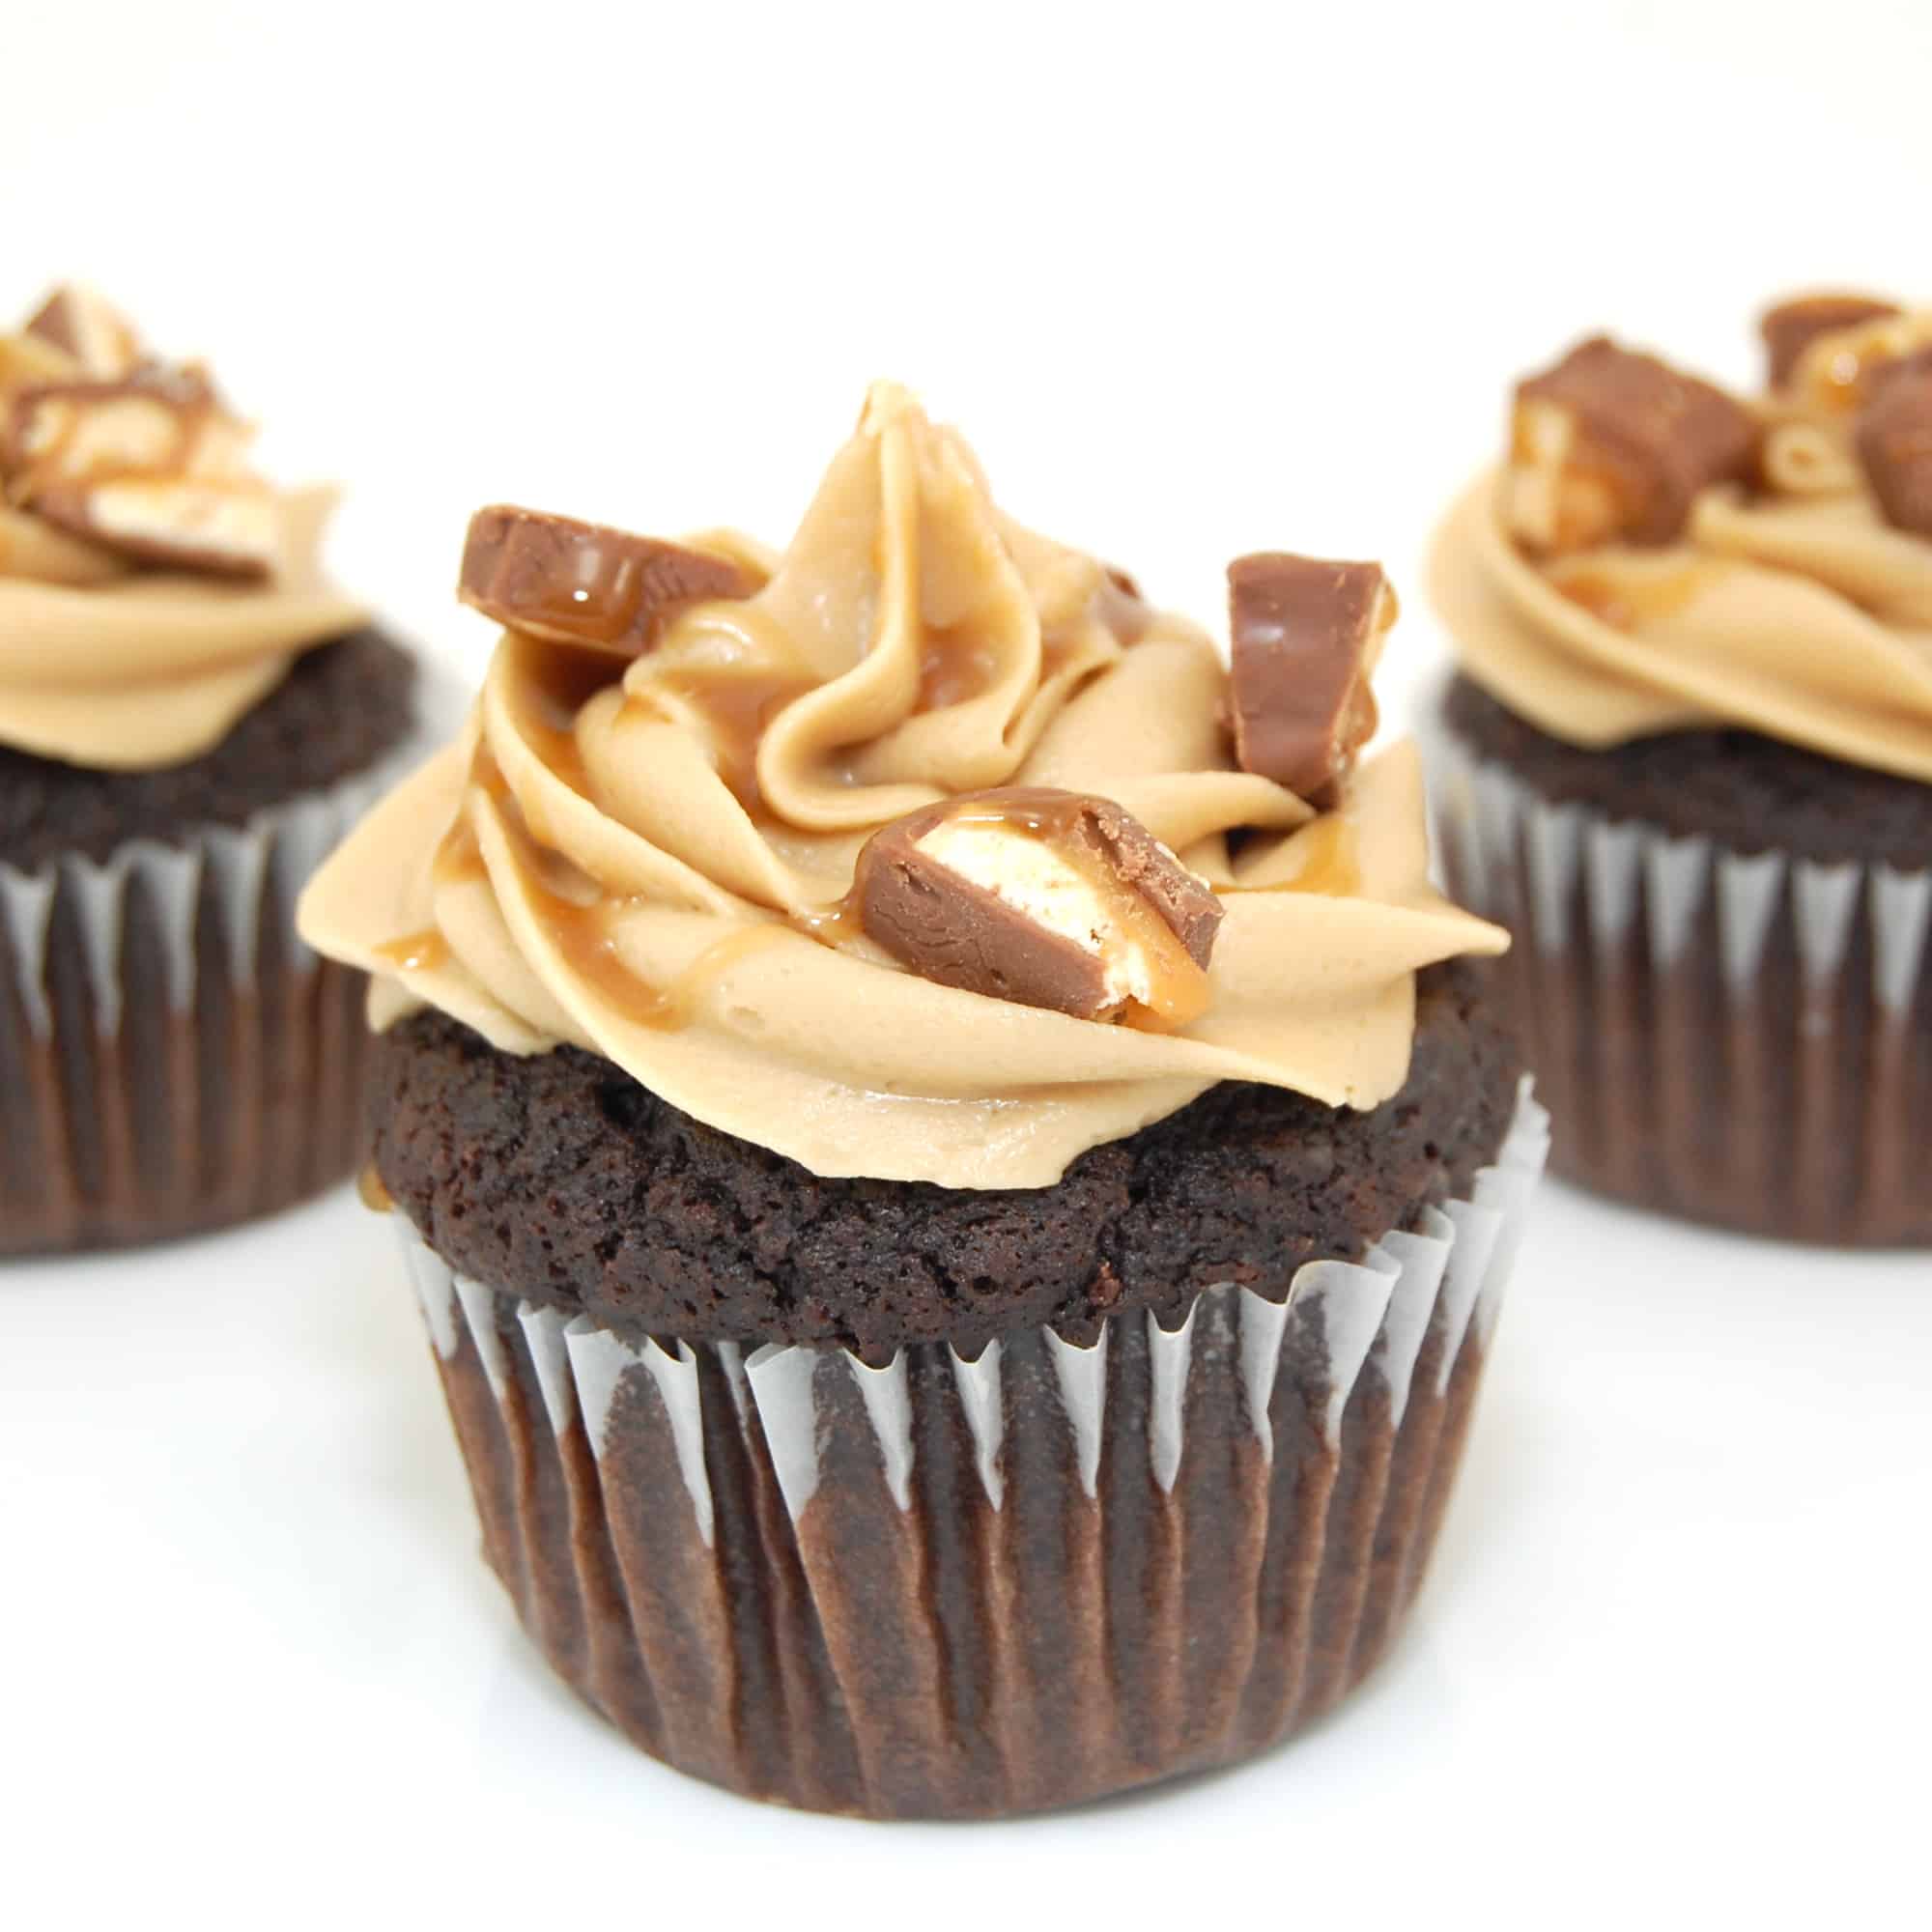 snickers cupcake with caramel frosting and Snickers on top